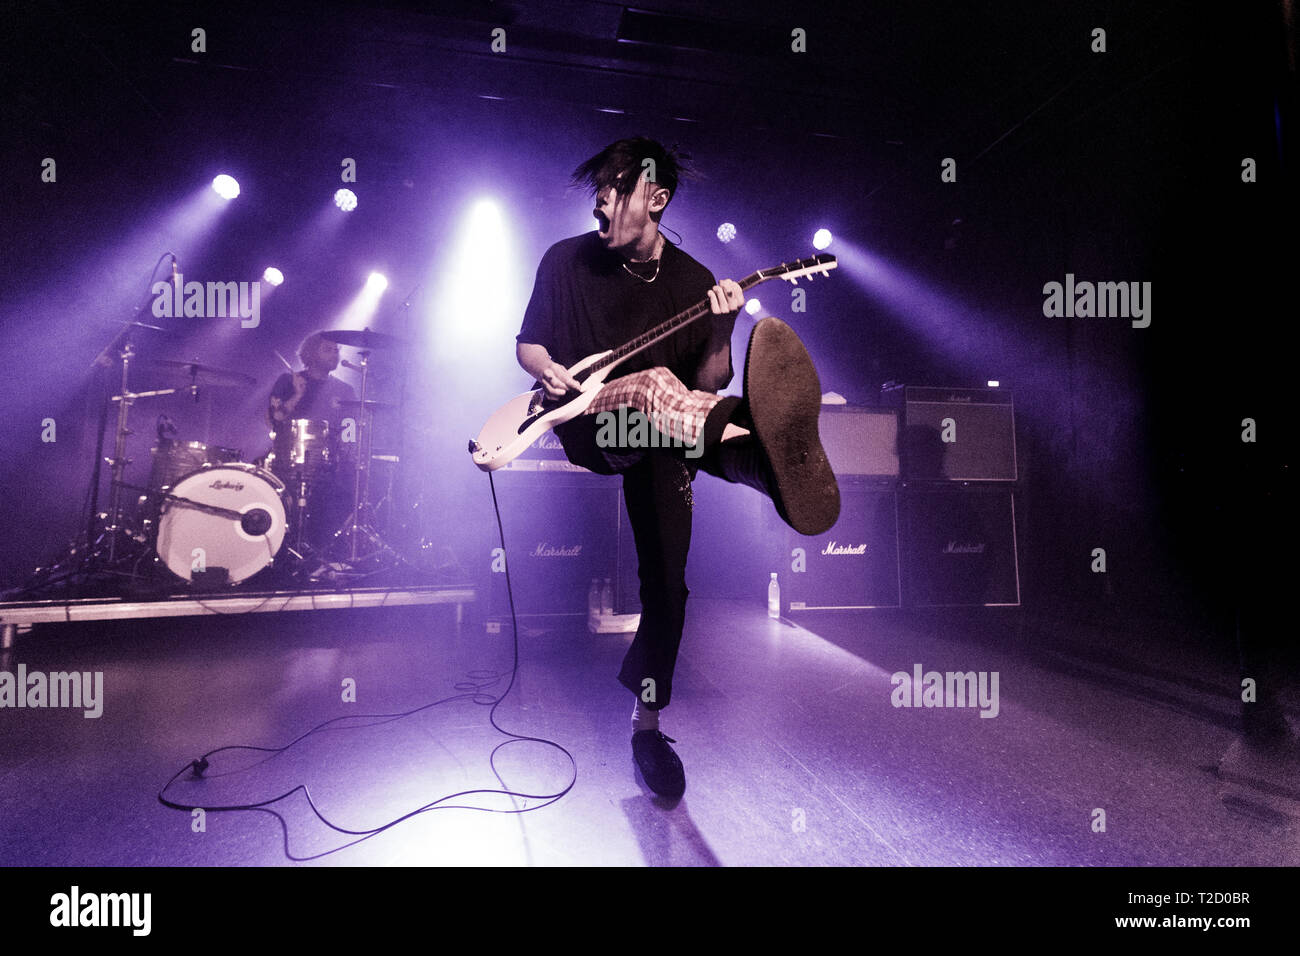 Denmark, Copenhagen - February 24, 2019. The English singer, songwriter and musician Yungblud performs a live concert at VEGA in Copenhagen. (Photo credit: Gonzales Photo - Per Lange). EXCLUDING DENMARK Stock Photo